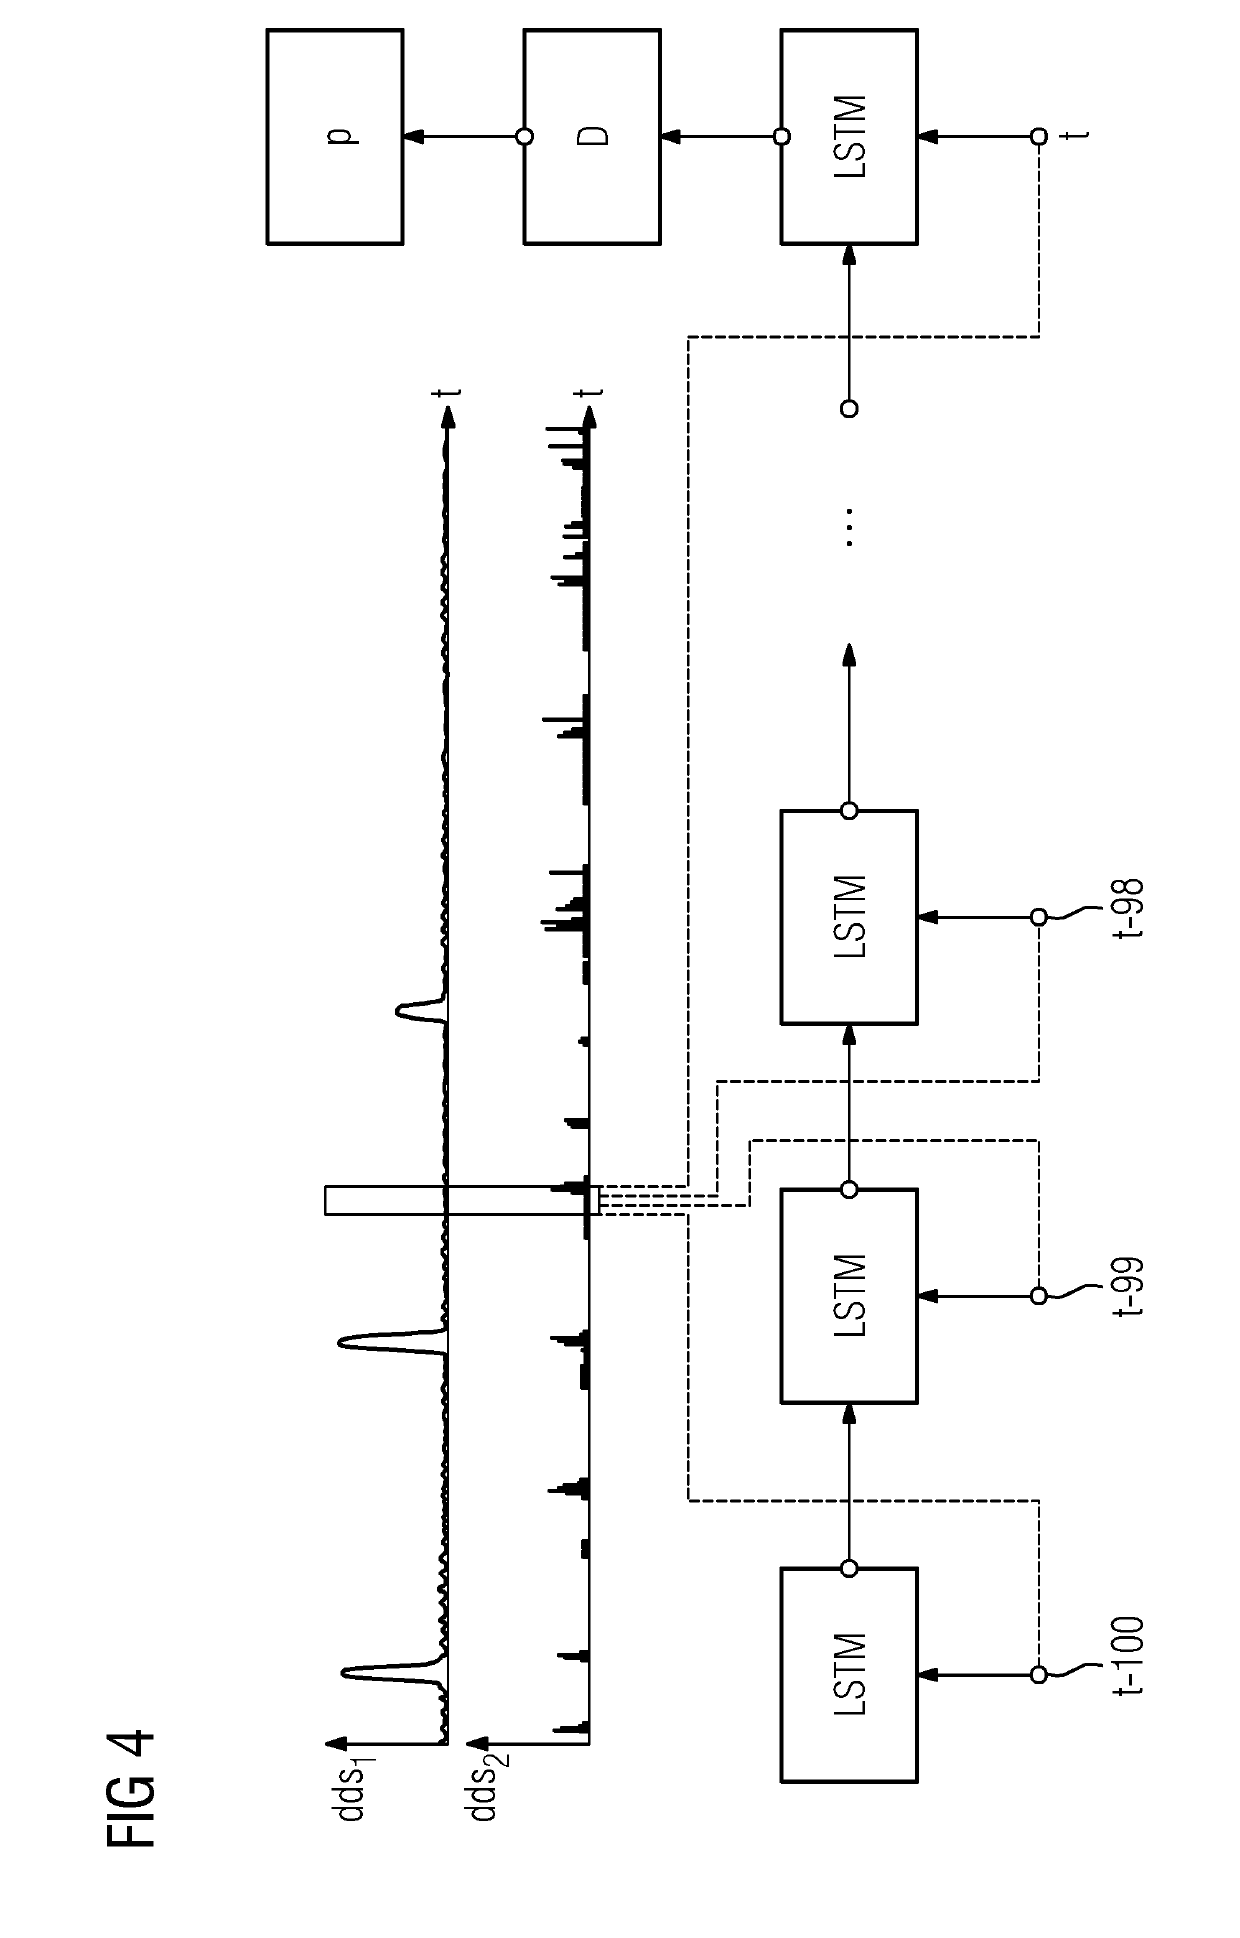 Data driven method for automated detection of anomalous work pieces during a production process